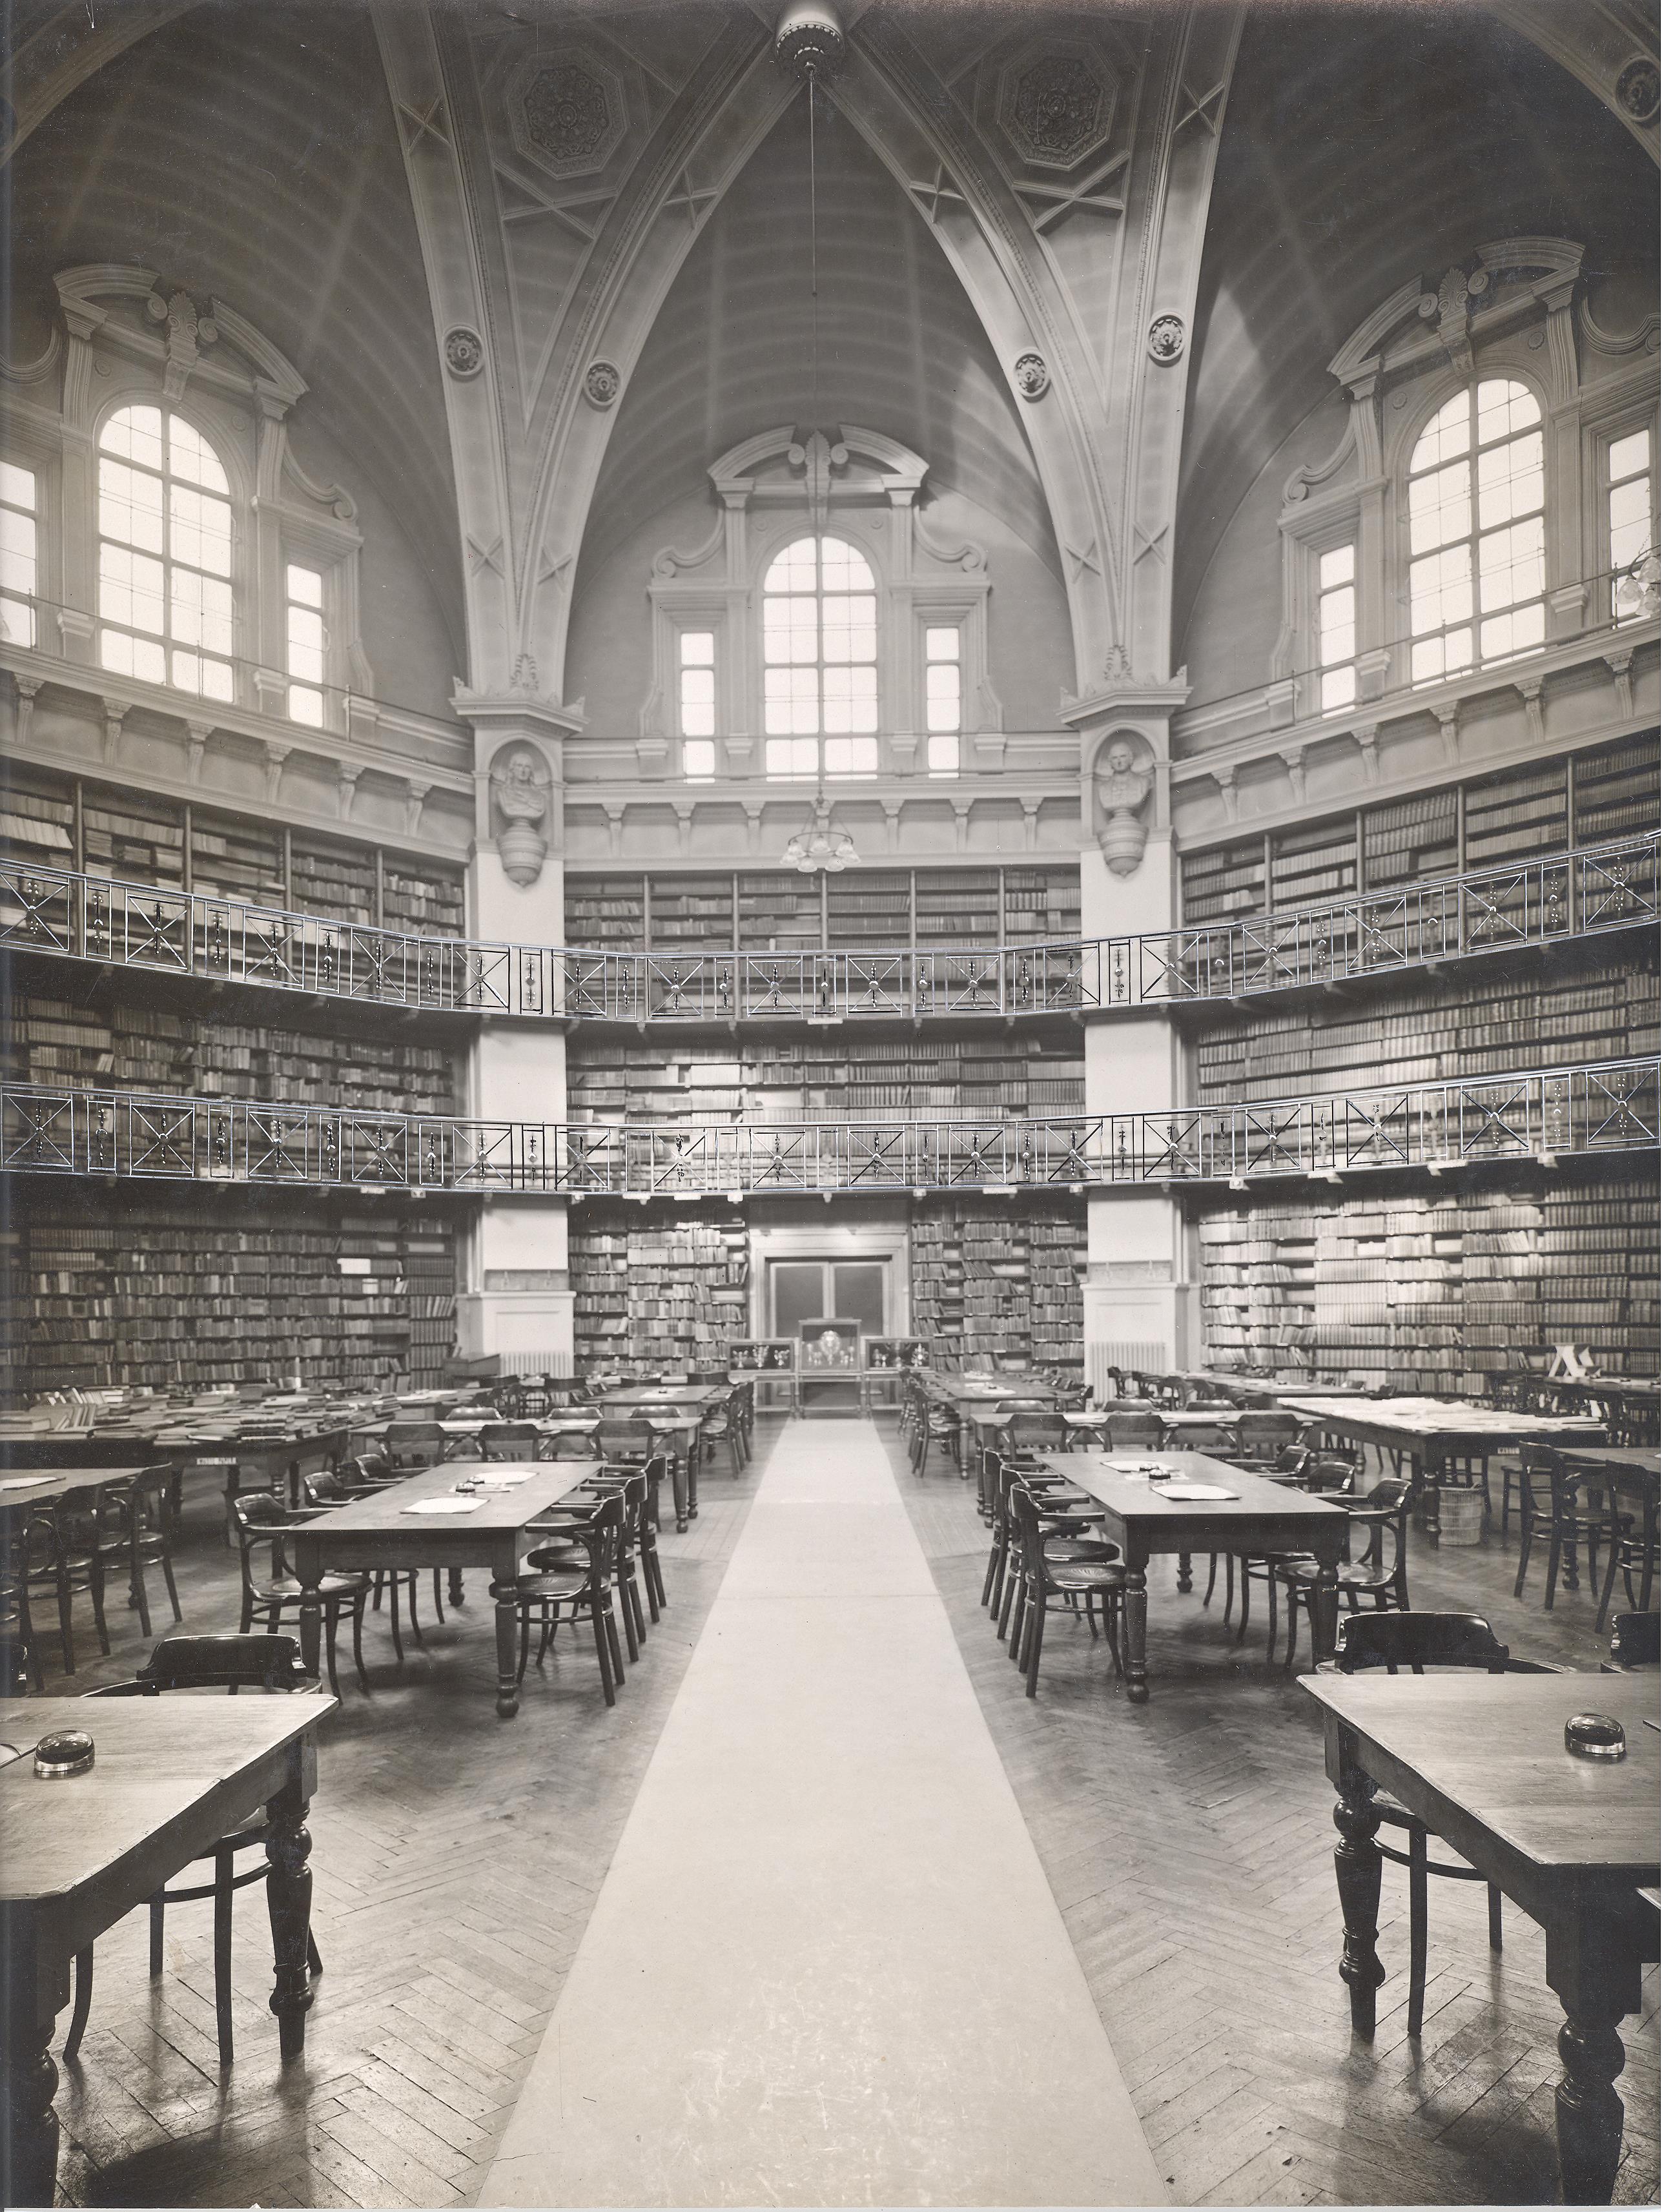 The Octagon laid out as a college library with books on the shelves and tables with ash trays